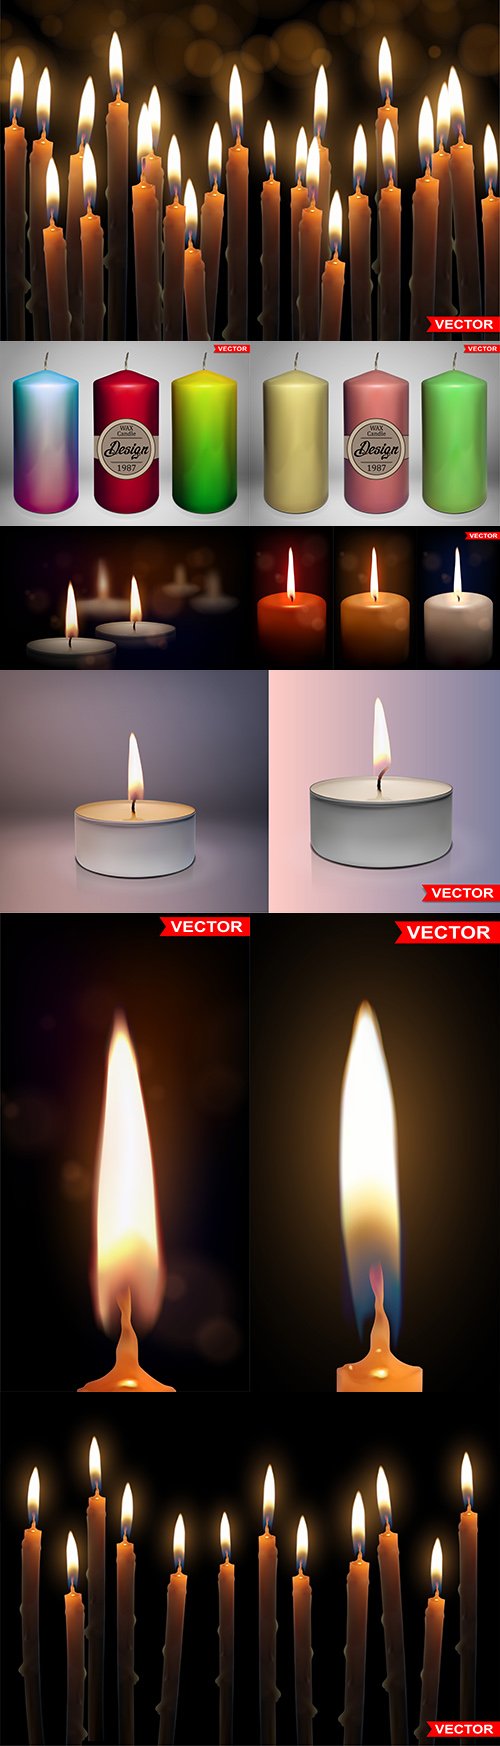 Realistic burning wax candles with flames